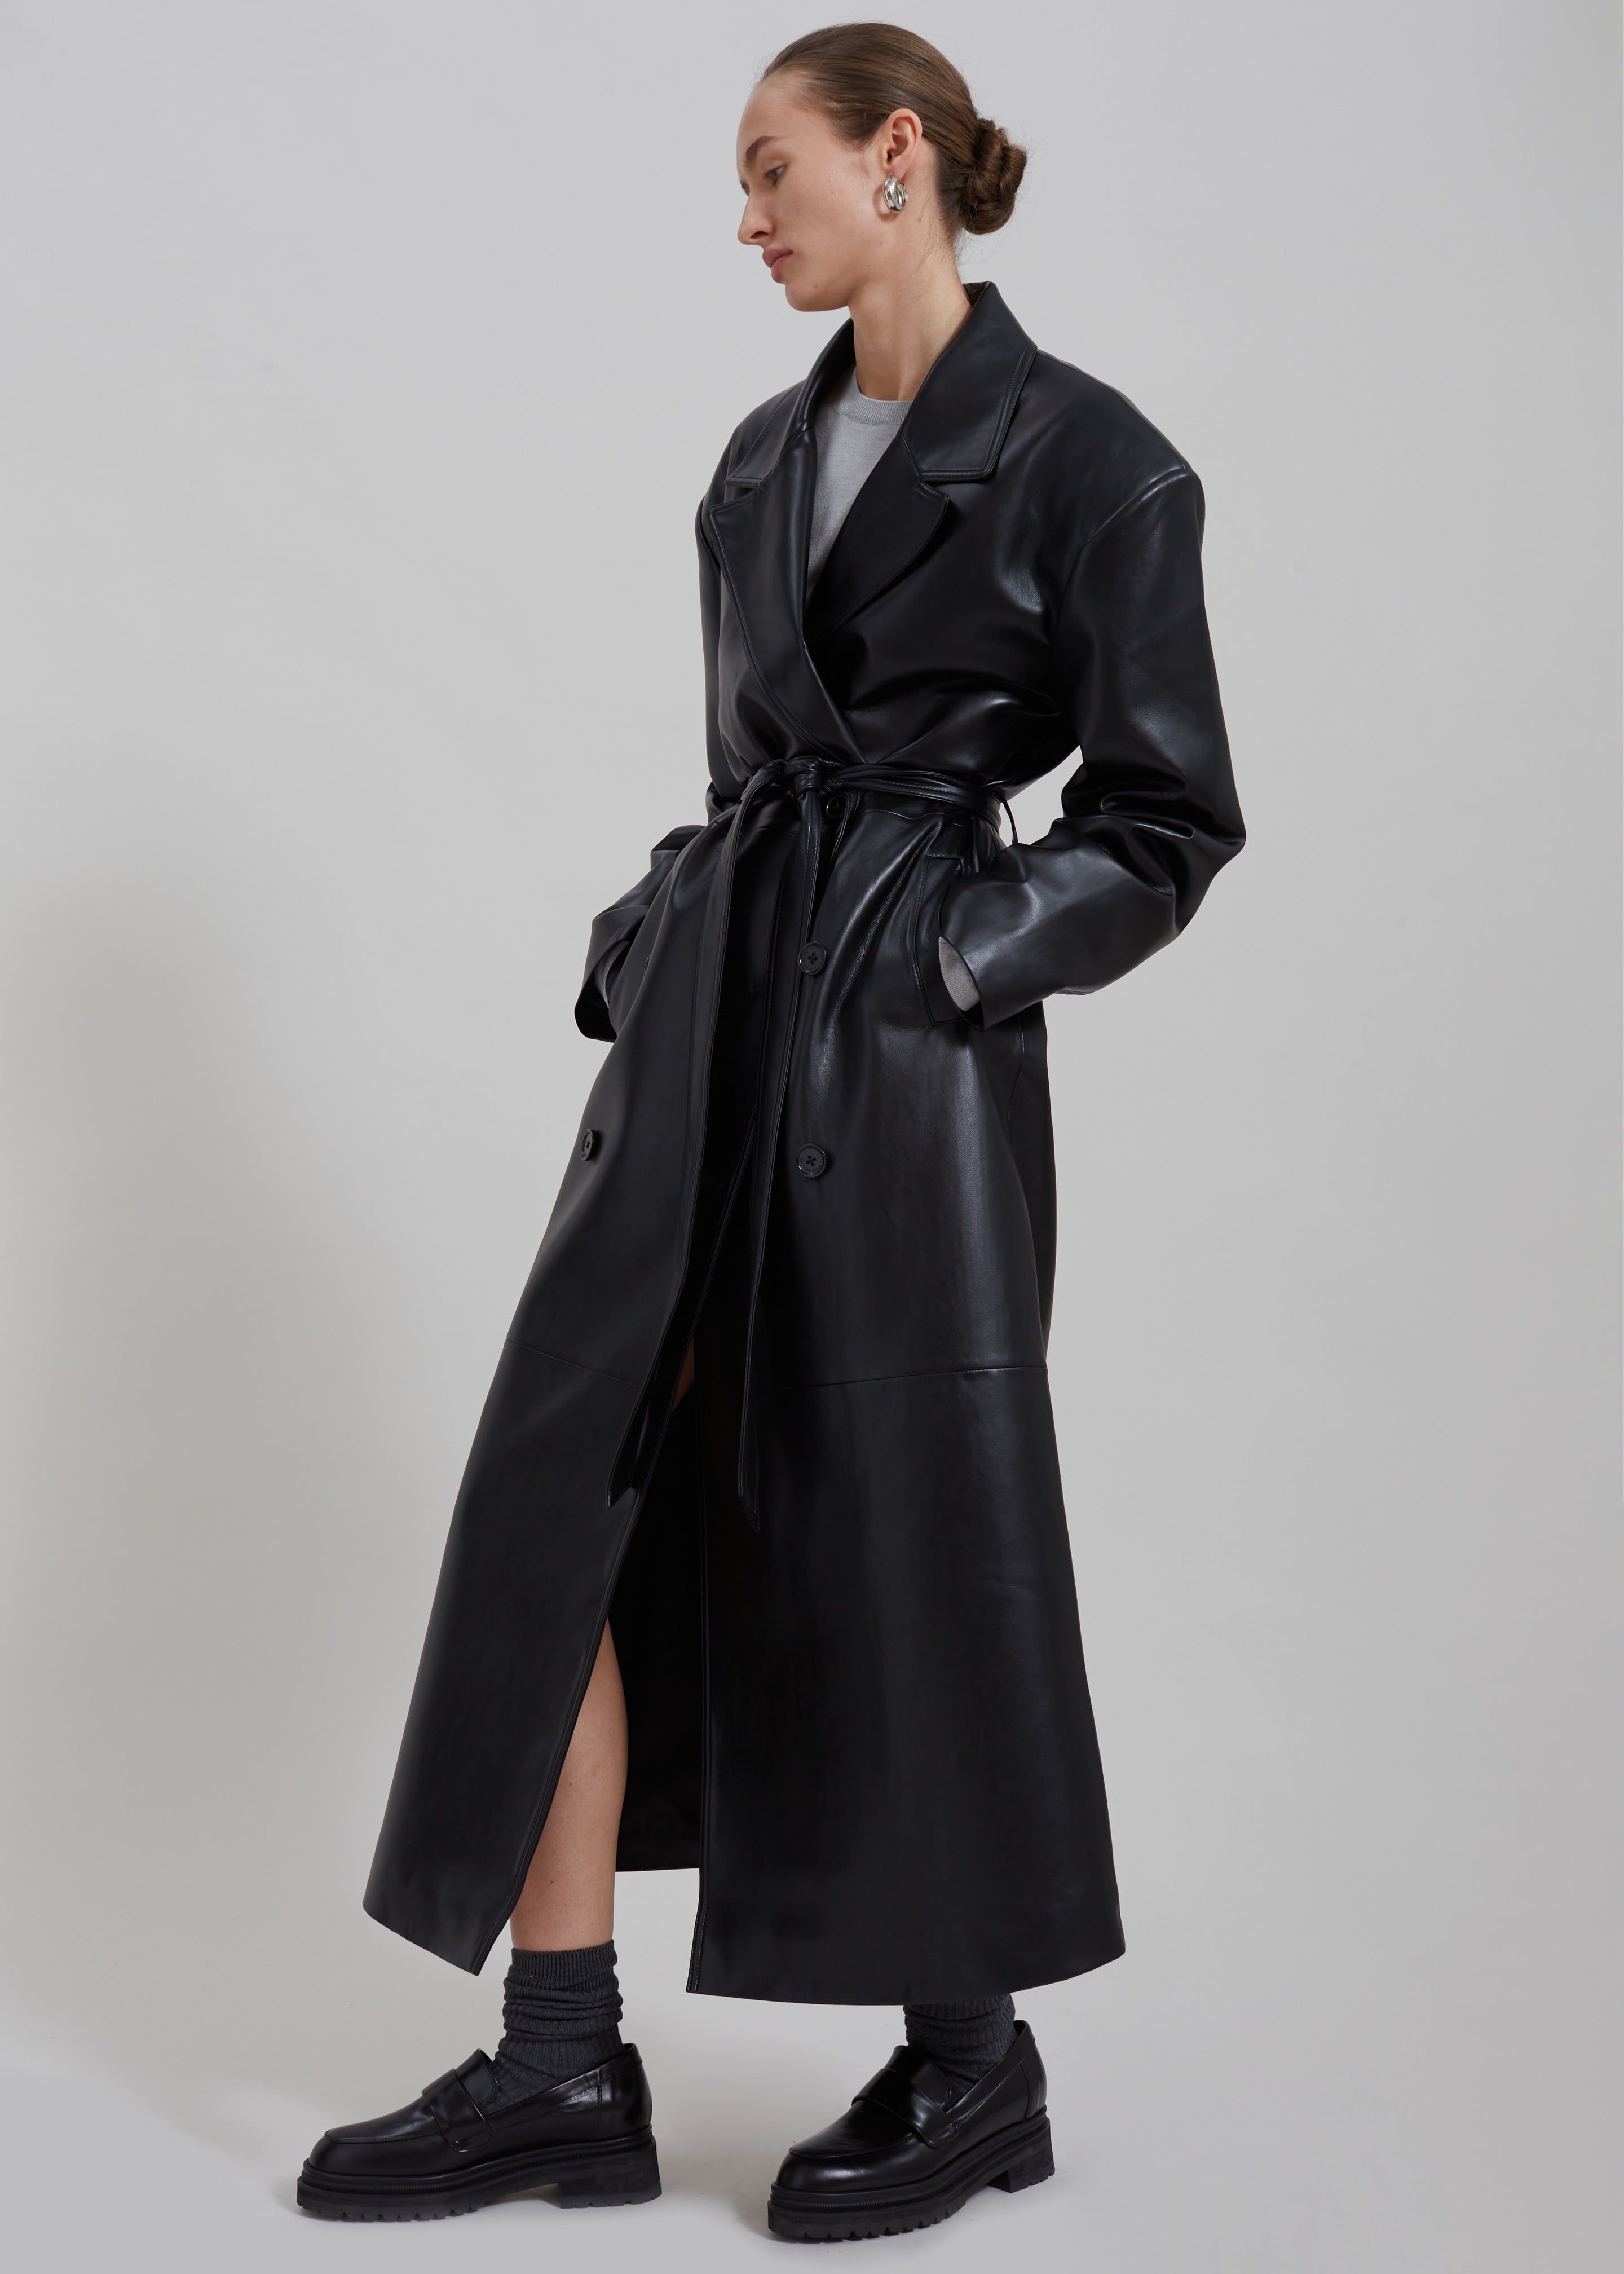 The Frankie Shop Tina Faux Leather Trench Coat - Black